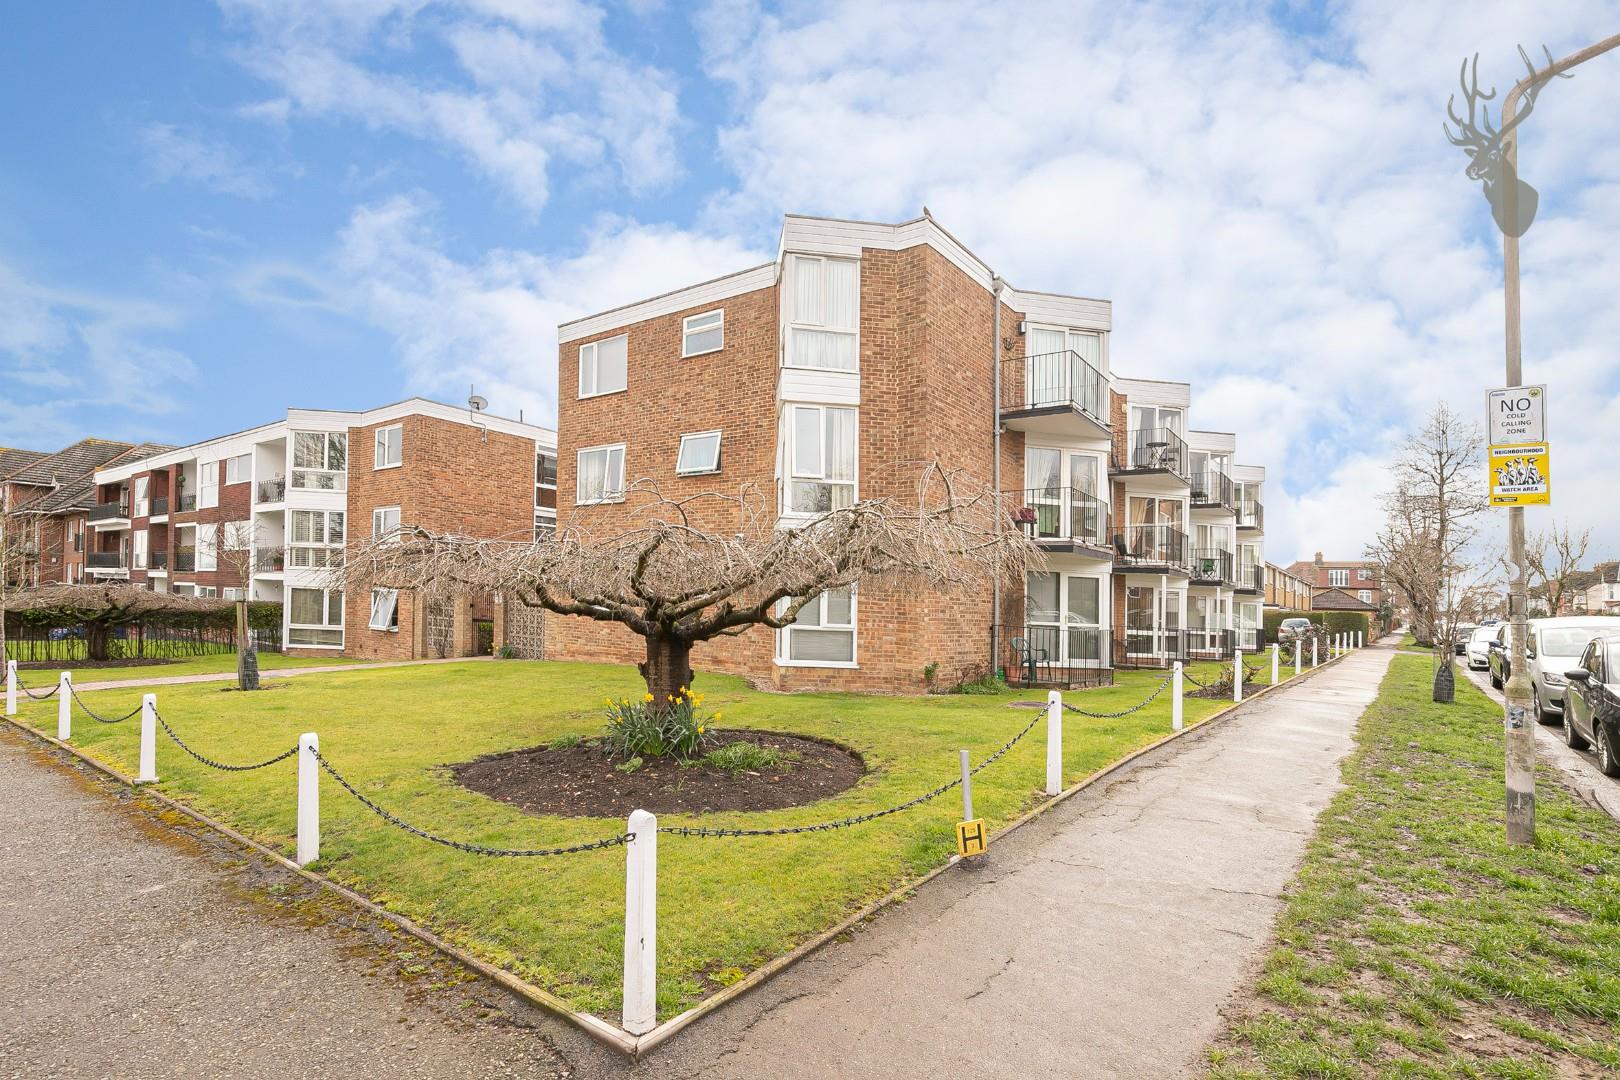 Similar Property: Flat - First Floor in Chingford